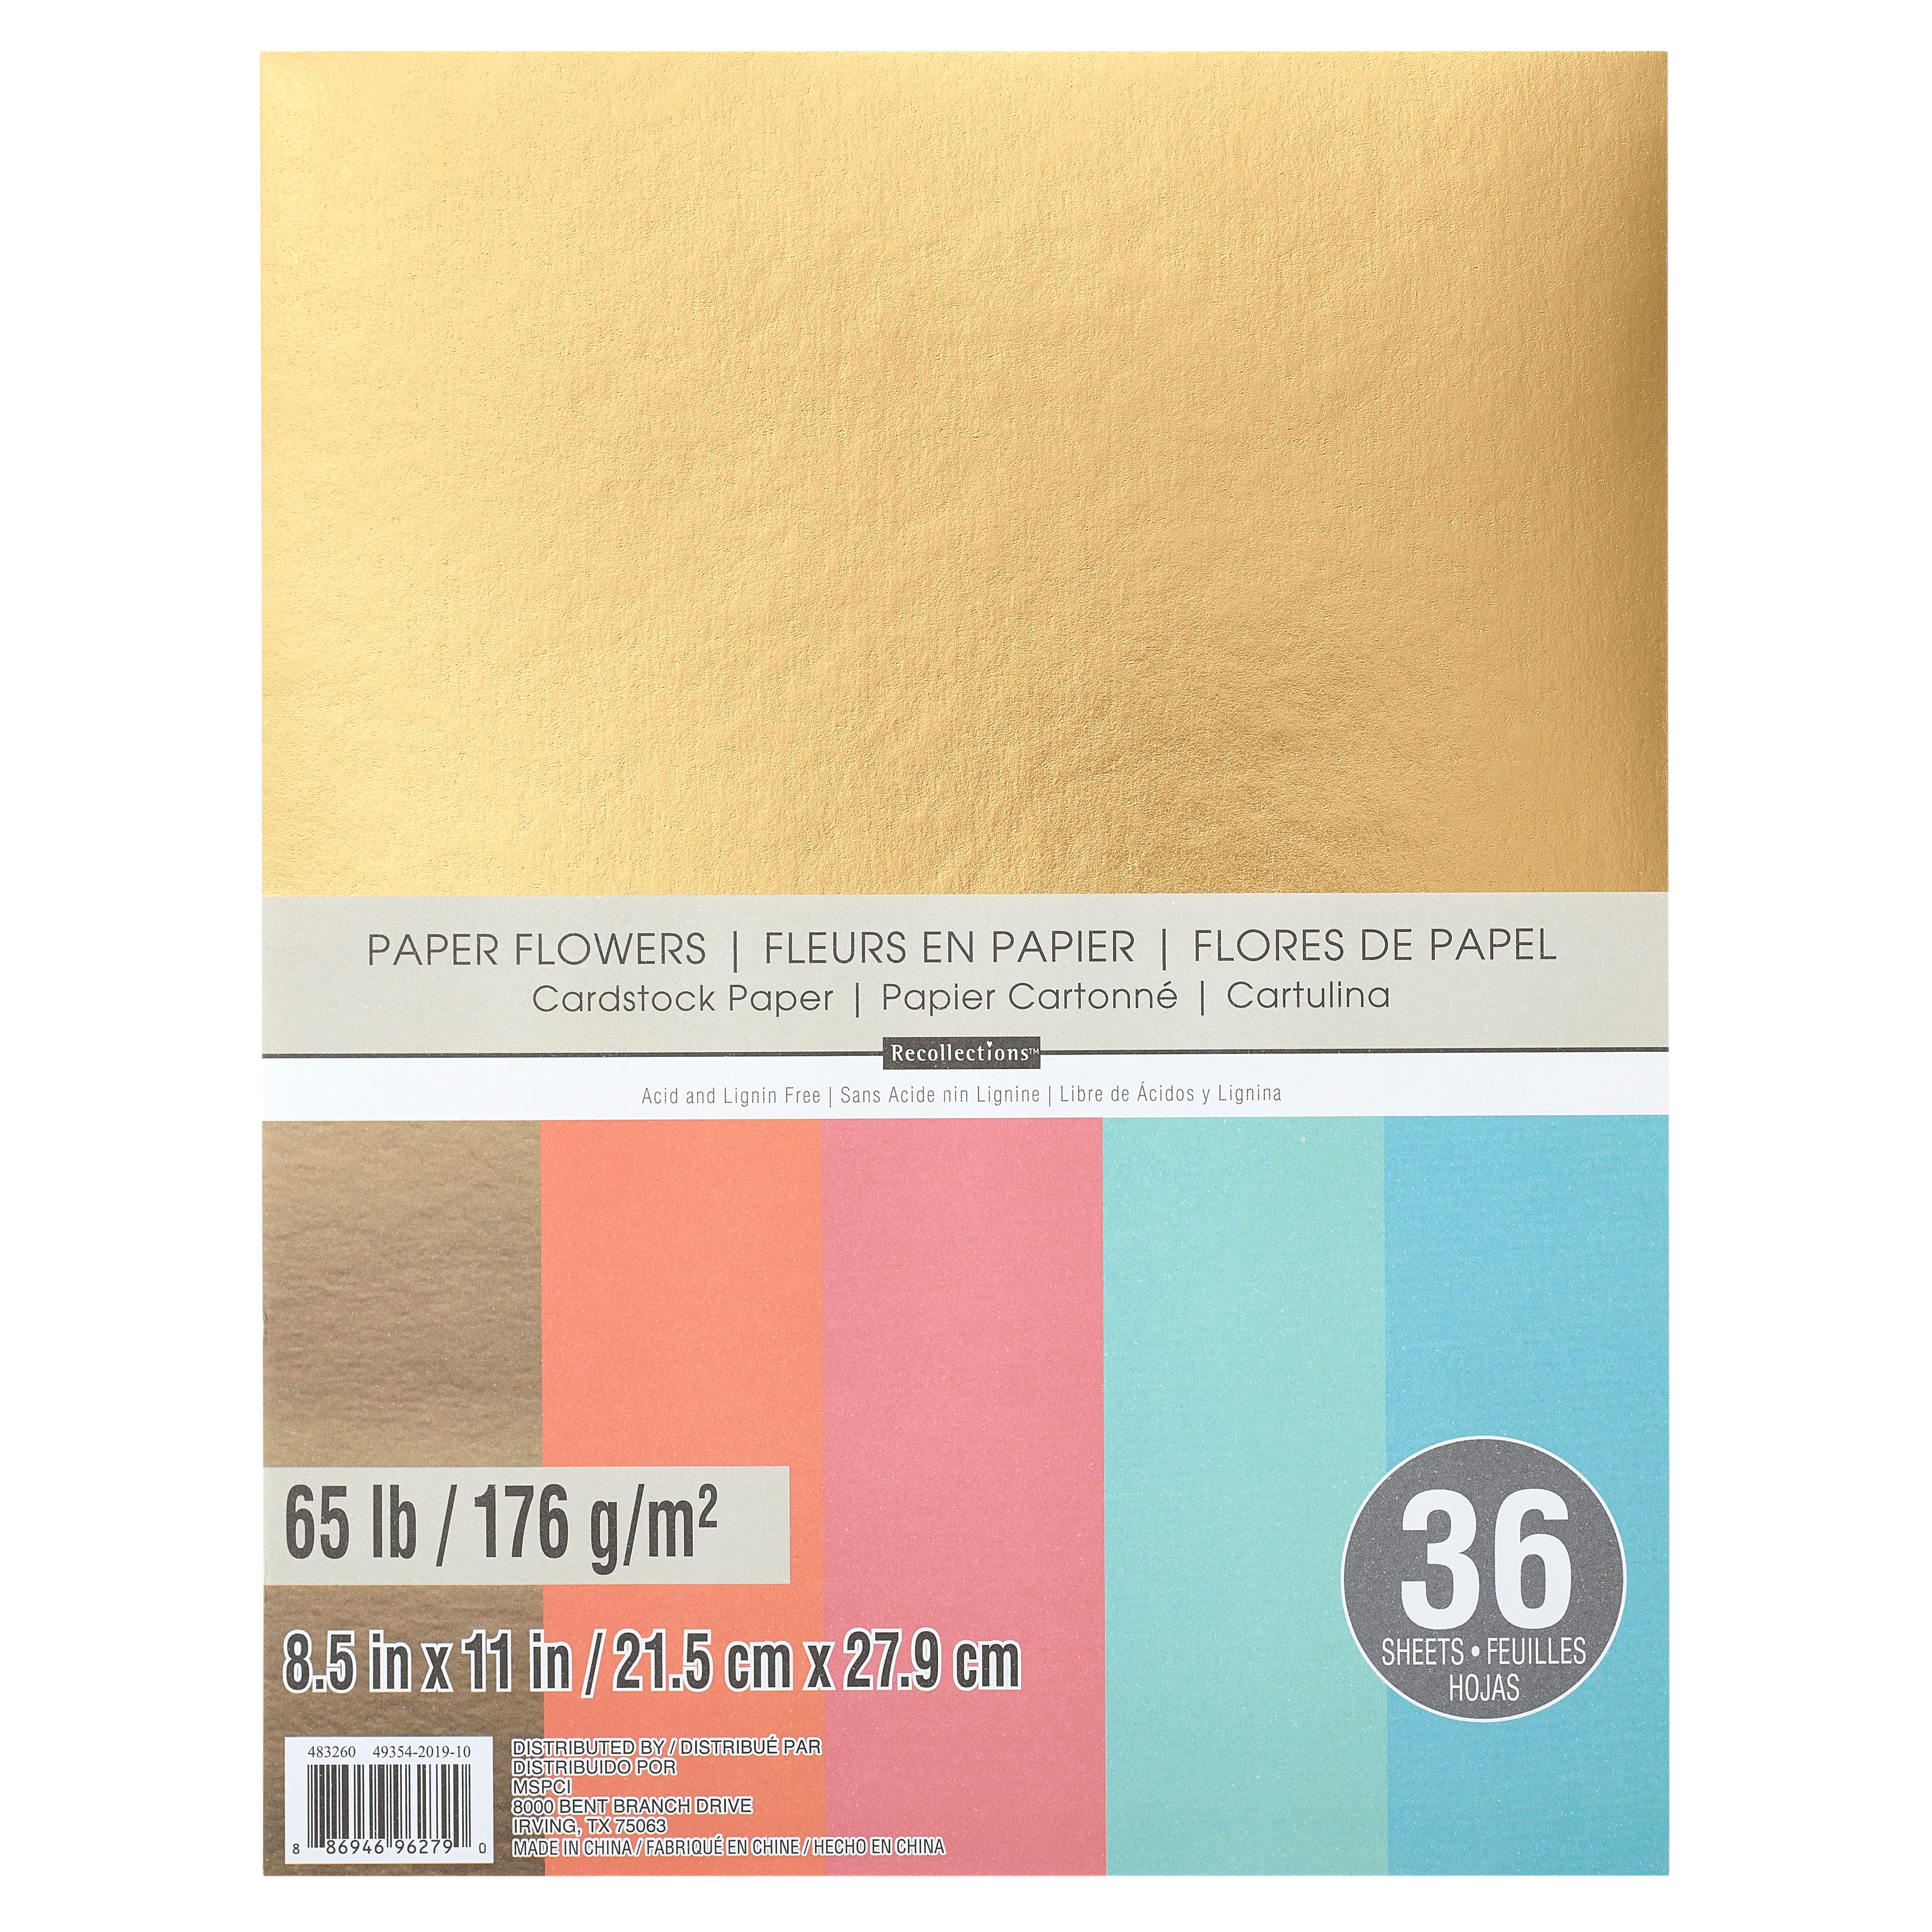 SALE!! 8.5 x 11 CARDSTOCK PAPER - FLORAL COLORS #3 - LOT OF 10 - NEW!!